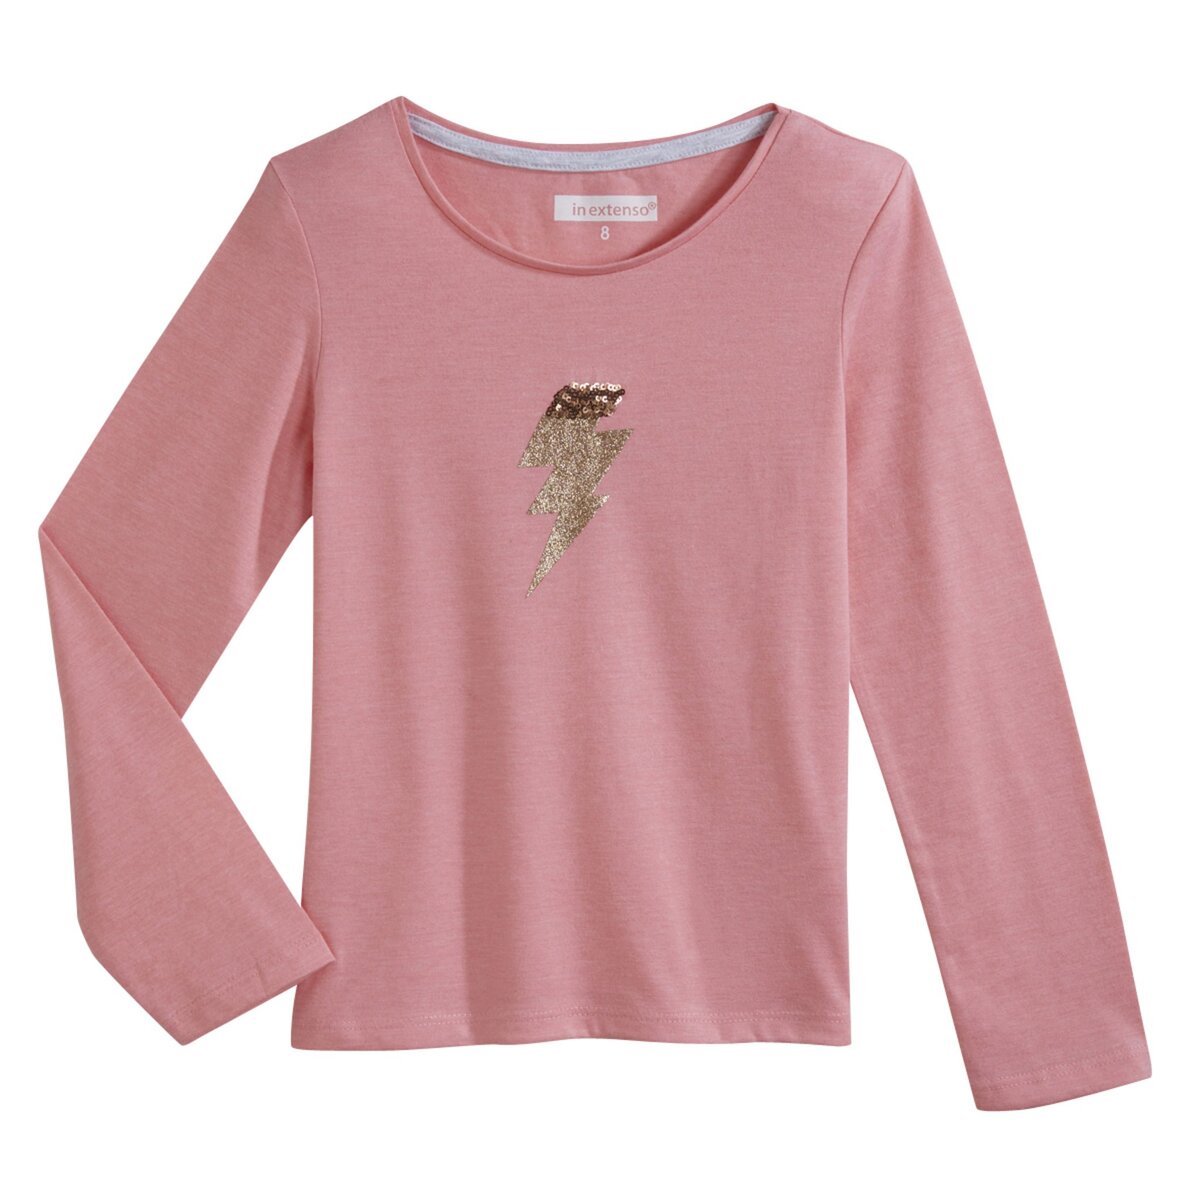 INEXTENSO Tee-shirt manches longues fille 